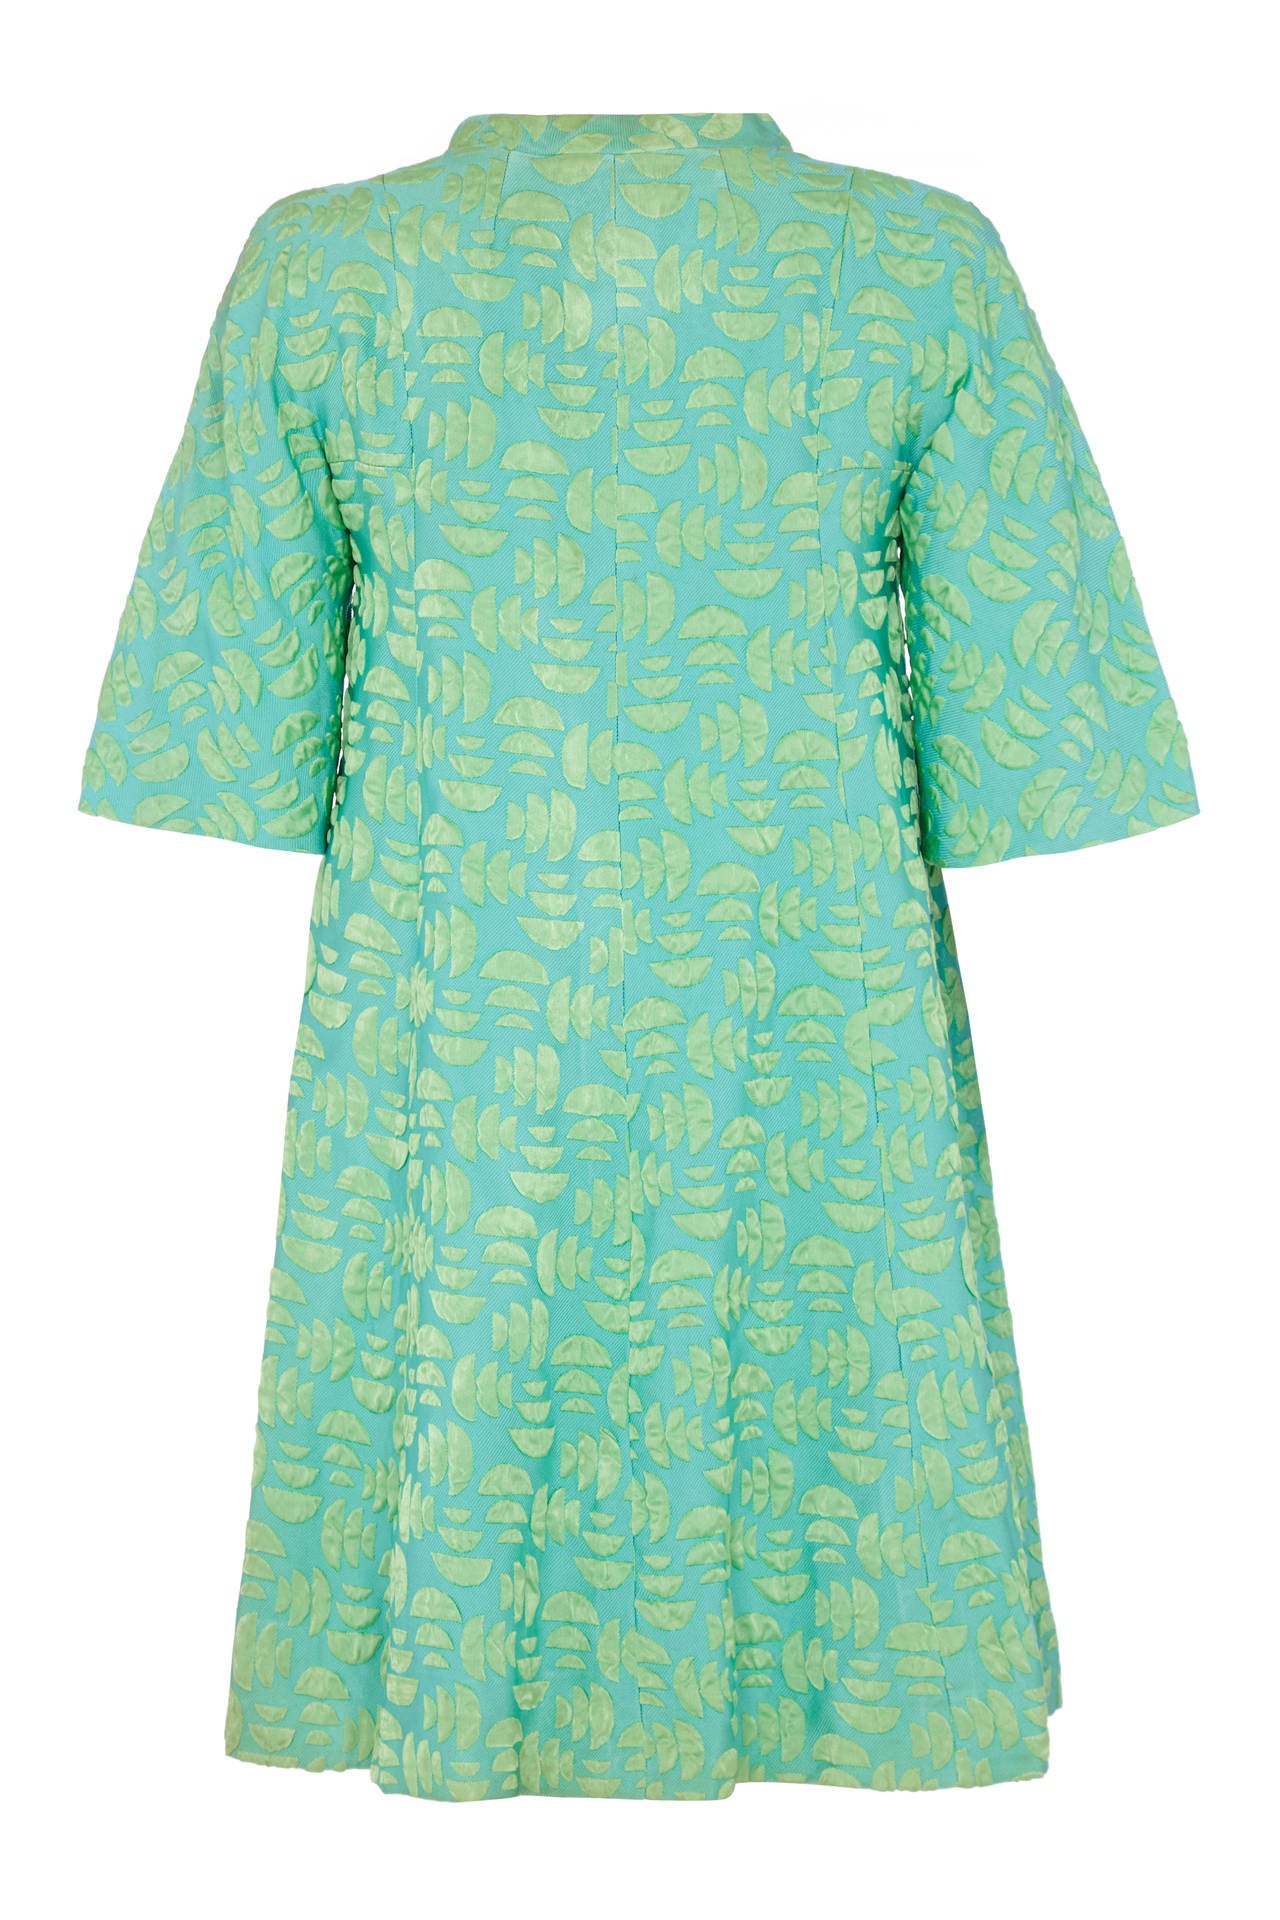 Stunning Jean Muir turquoise A-line shift dress with a lovely miniature semicircle jacquard silk pattern and covered buttons to fasten down the front. So typical of the style of the day this piece features elbow length sleeves, two hip level pocket